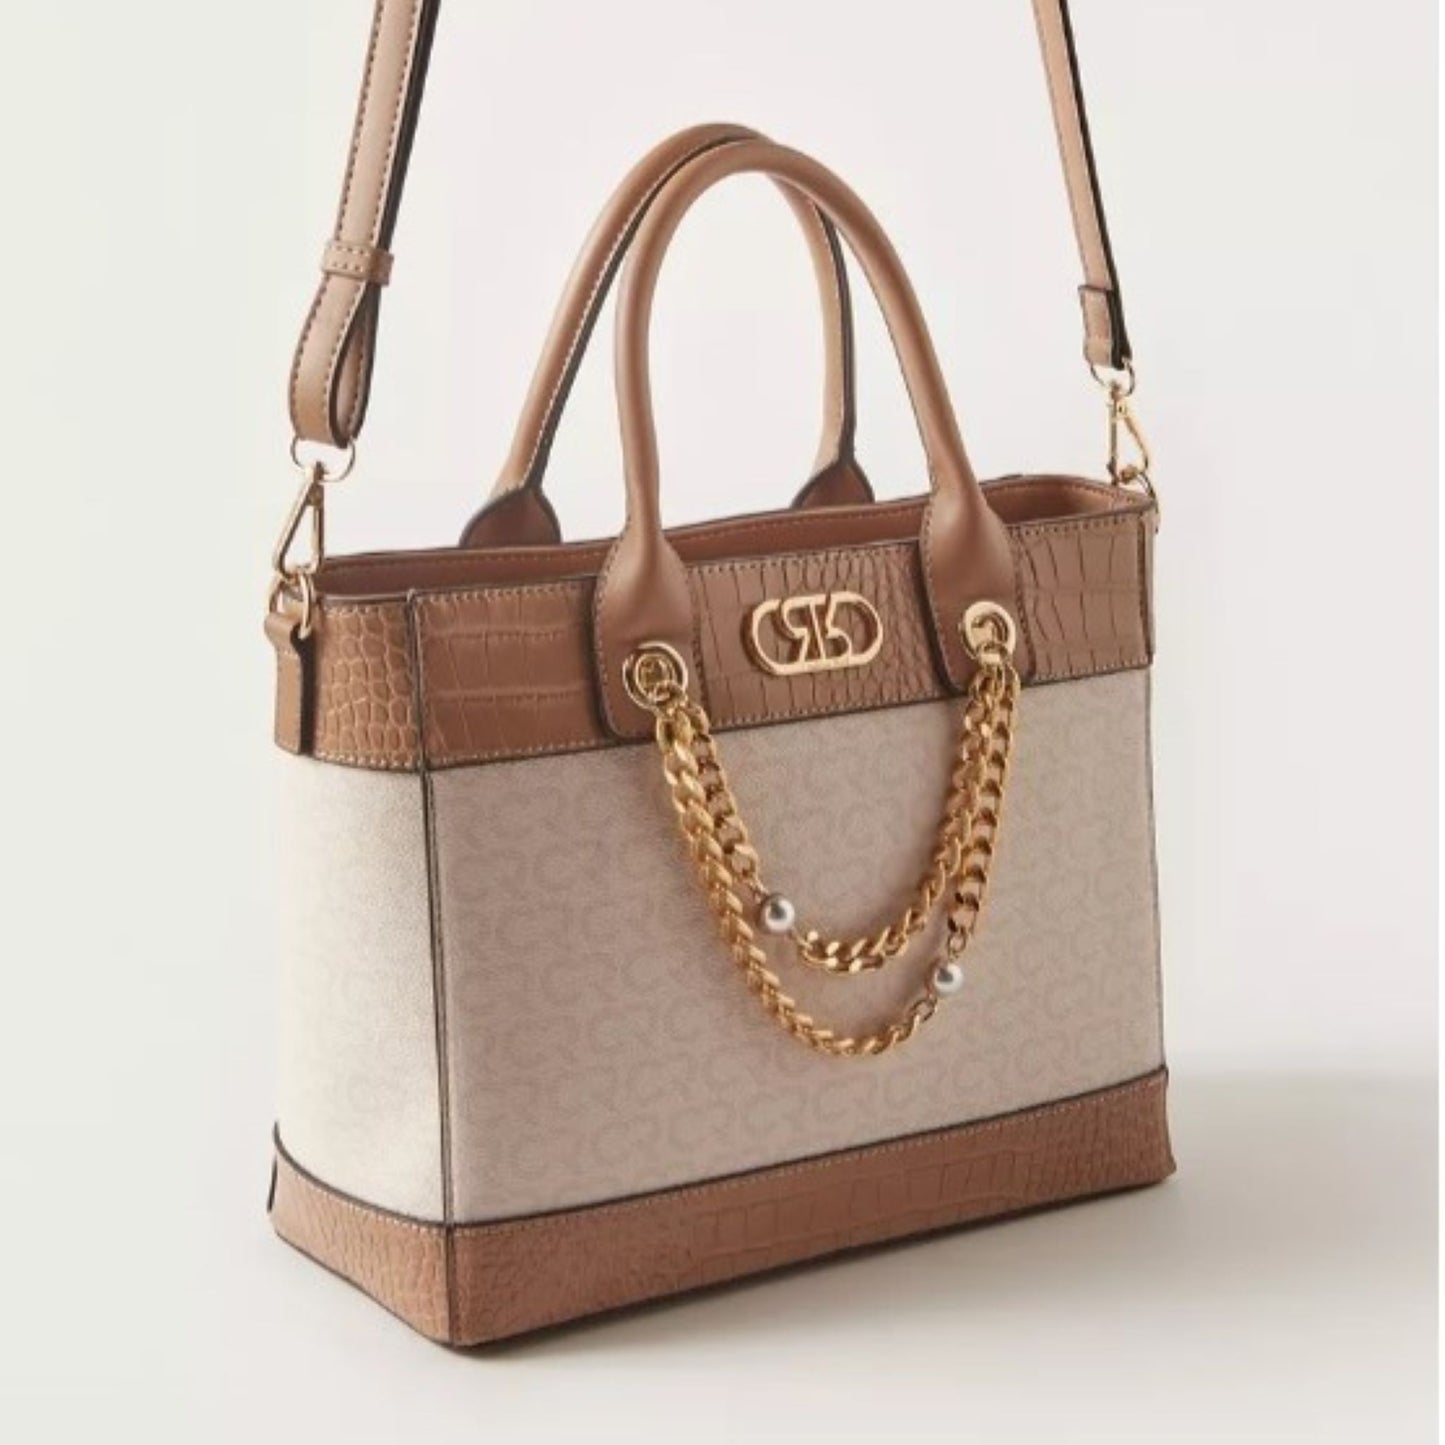 Beige and Tan Textured Top Handle Satchel Tote Bag with Chain Accent